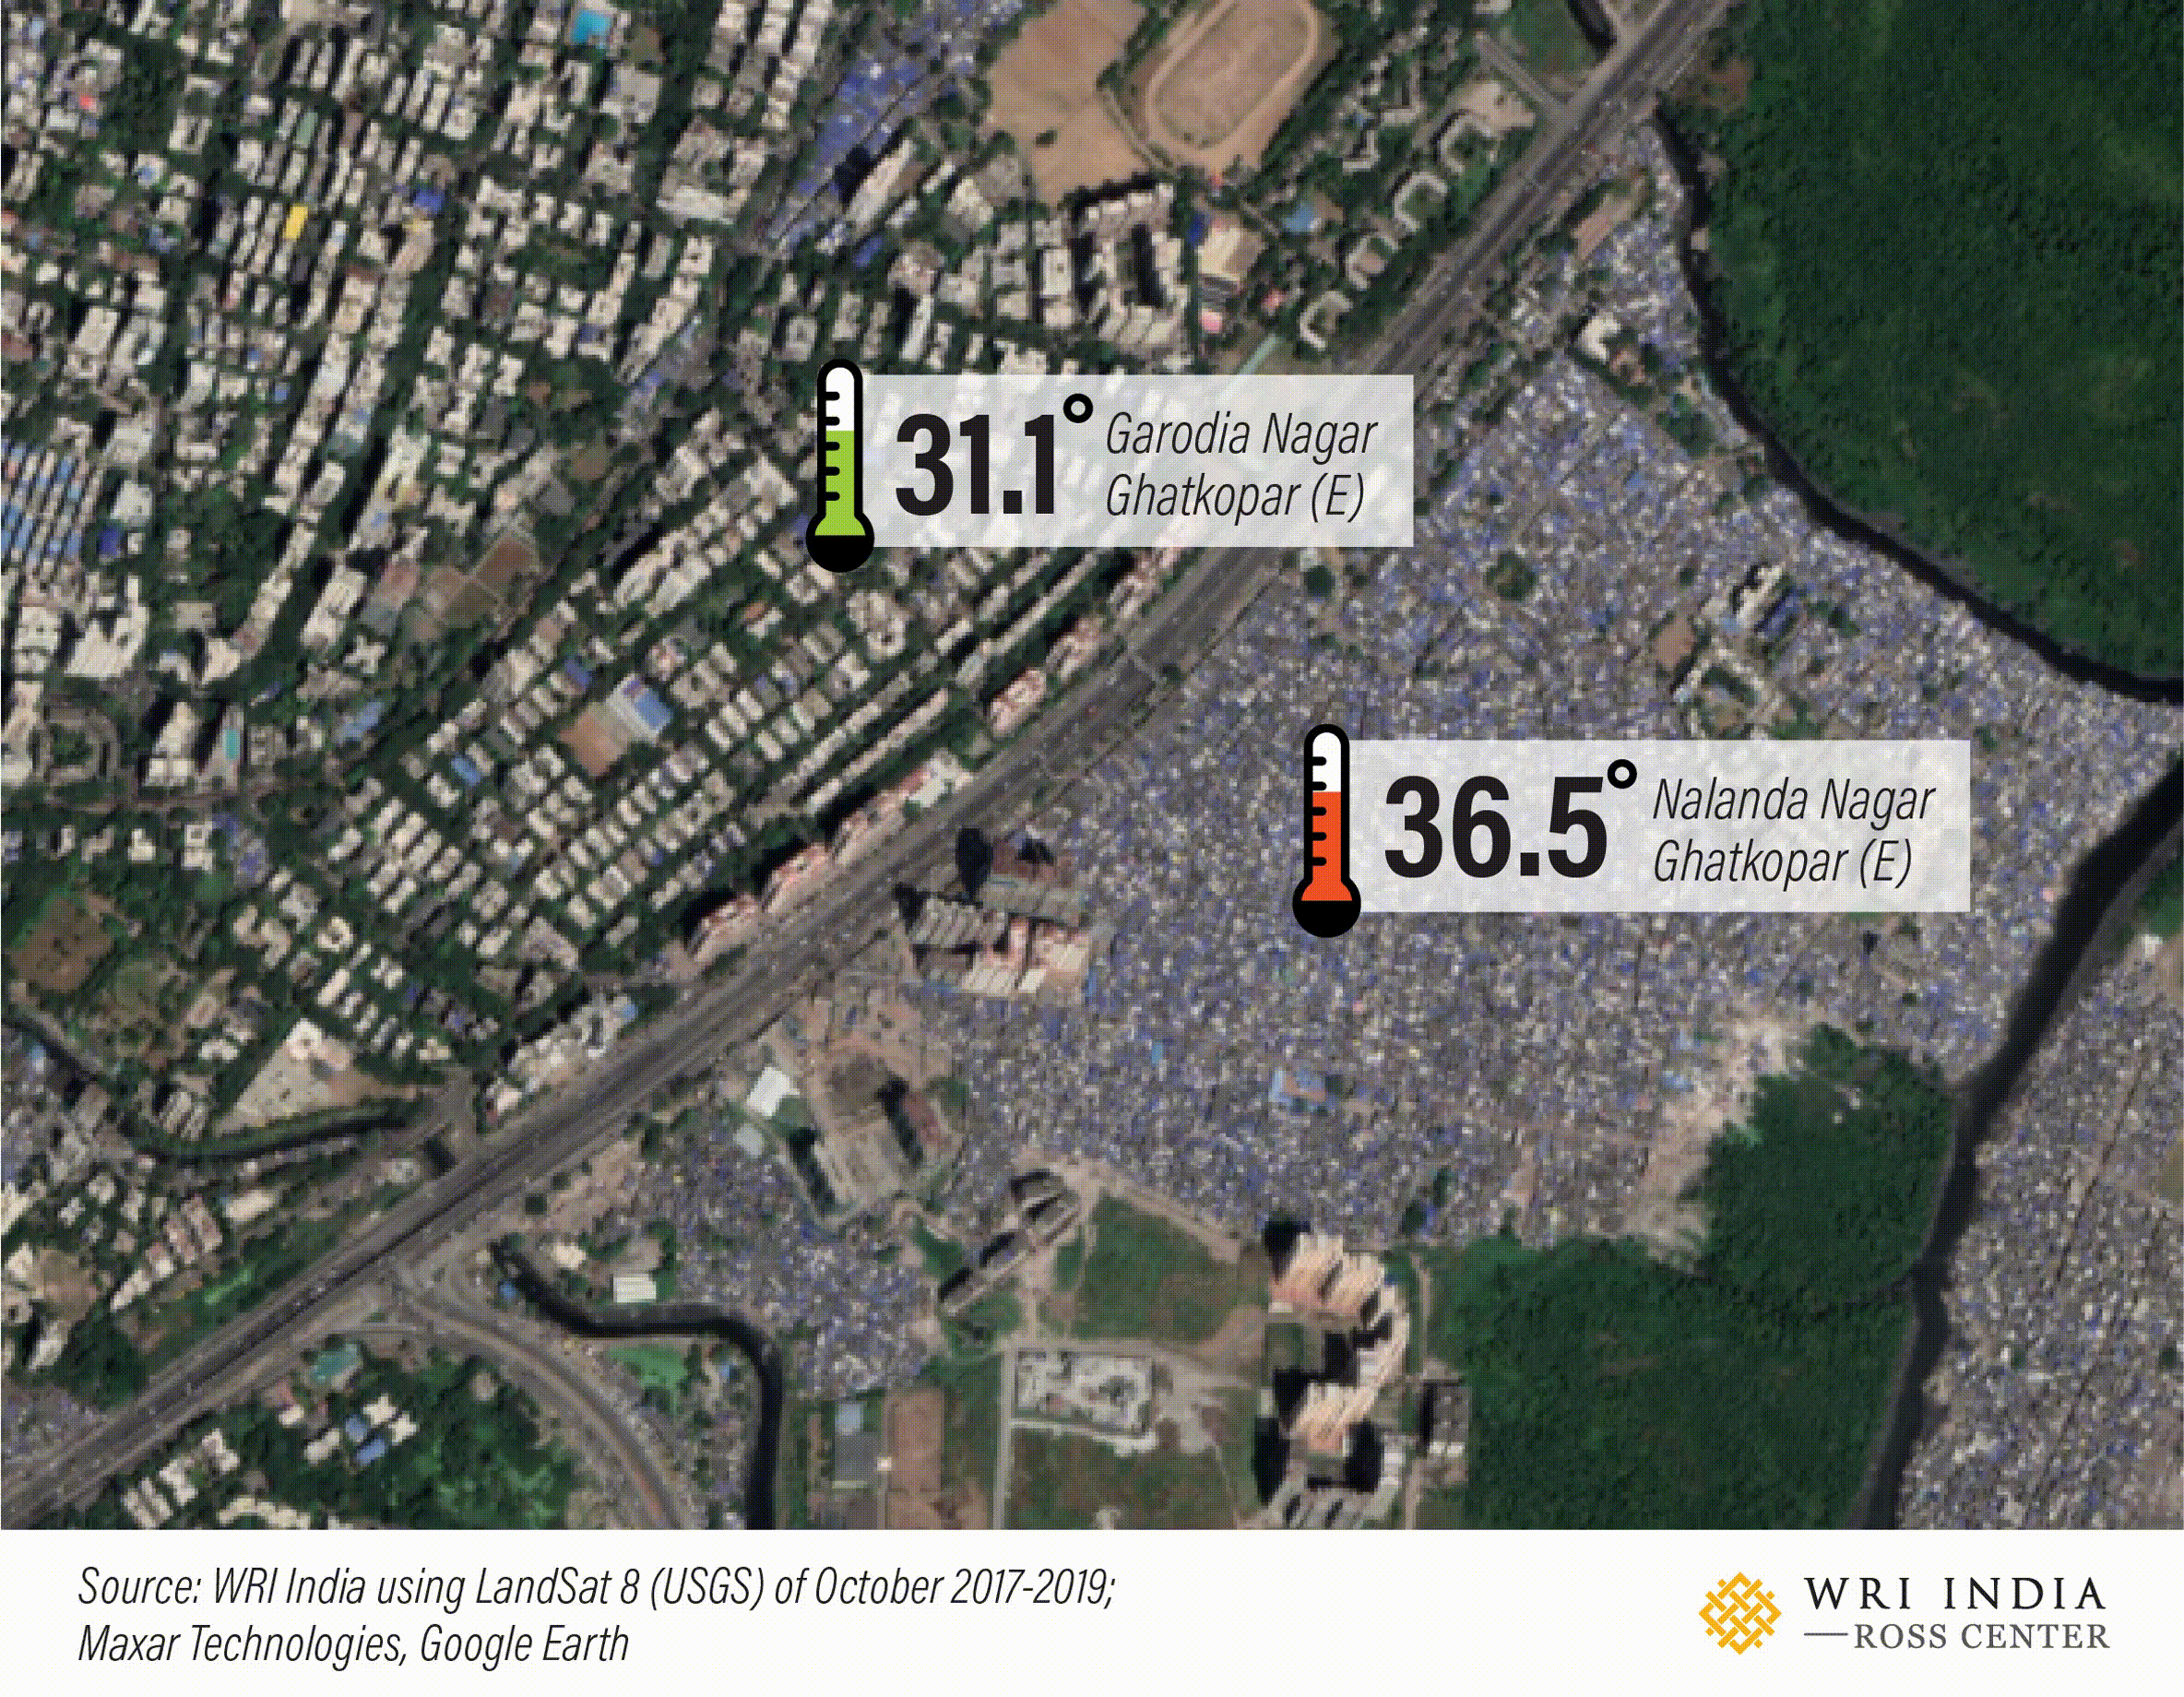 A difference of around 5°C can be observed between low-income and middle-income housing in Ghatkopar, Mumbai. Image by WRI India using LandSat8 (USGS) for October (2017-2019)